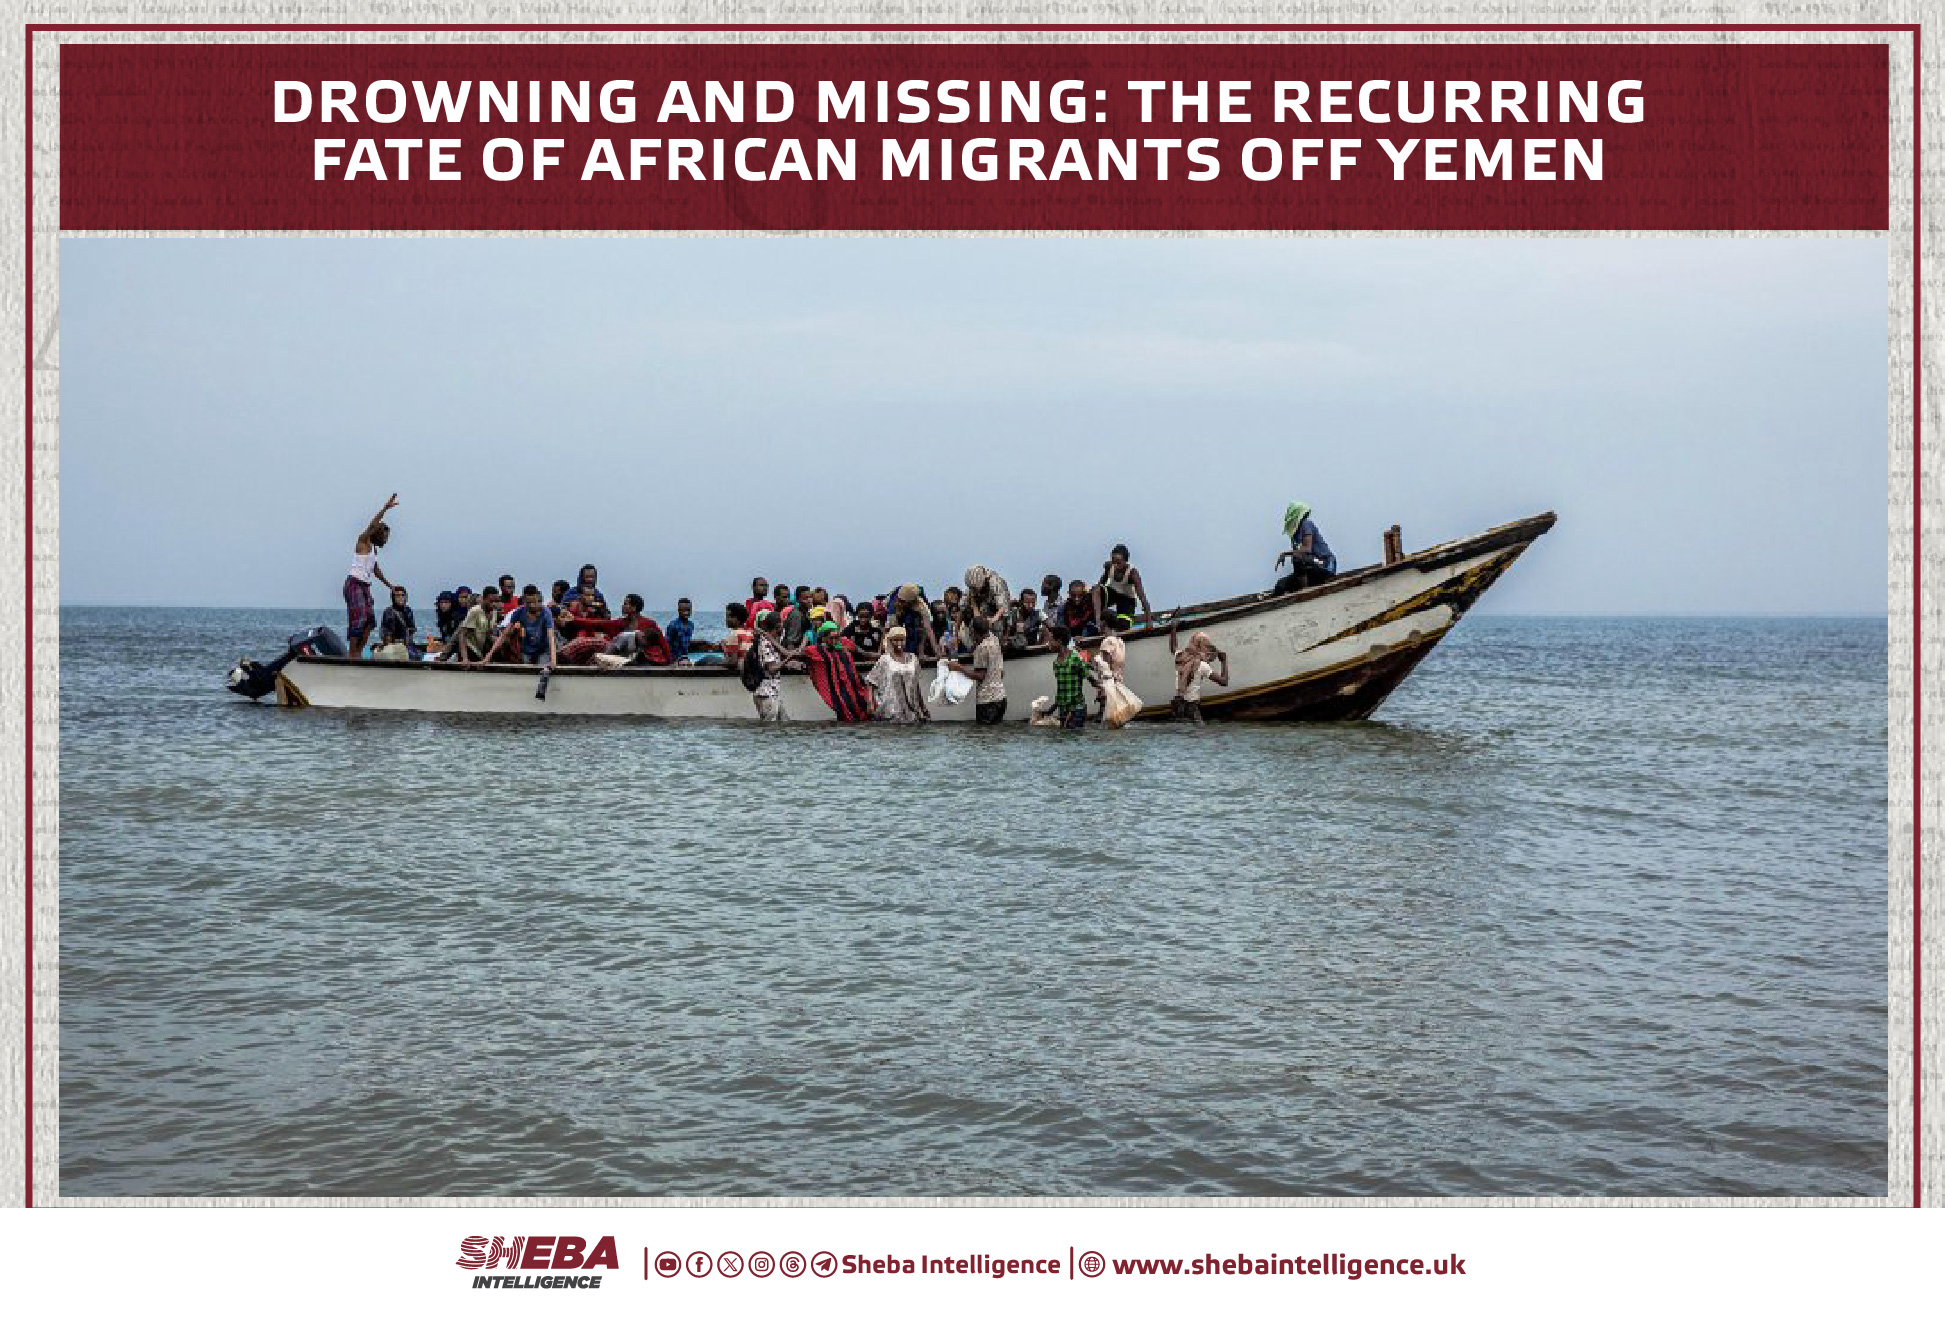 Drowning and Missing: The Recurring Fate of African Migrants Off Yemen